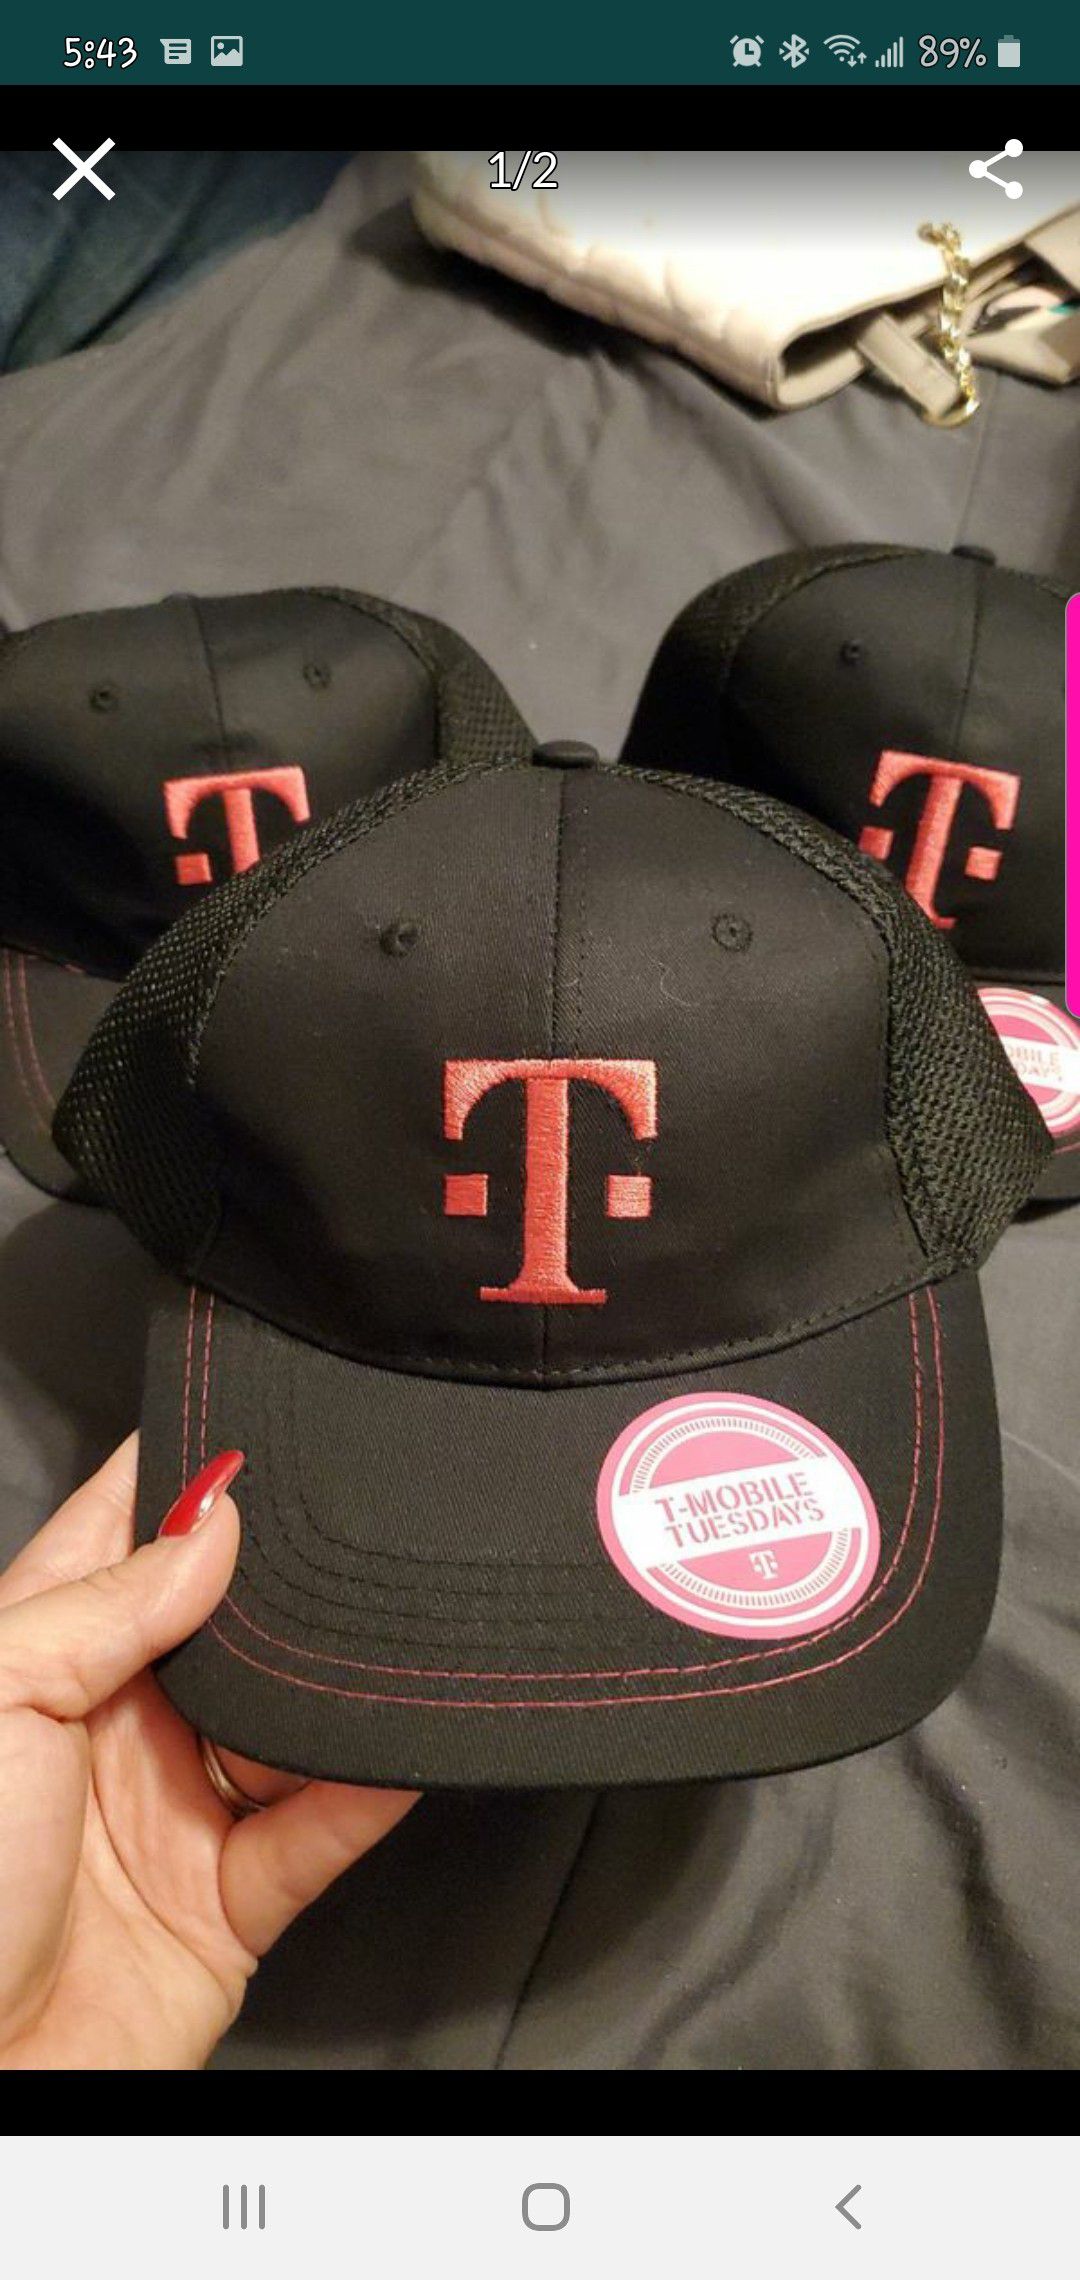 FREE! T mobile Hats!